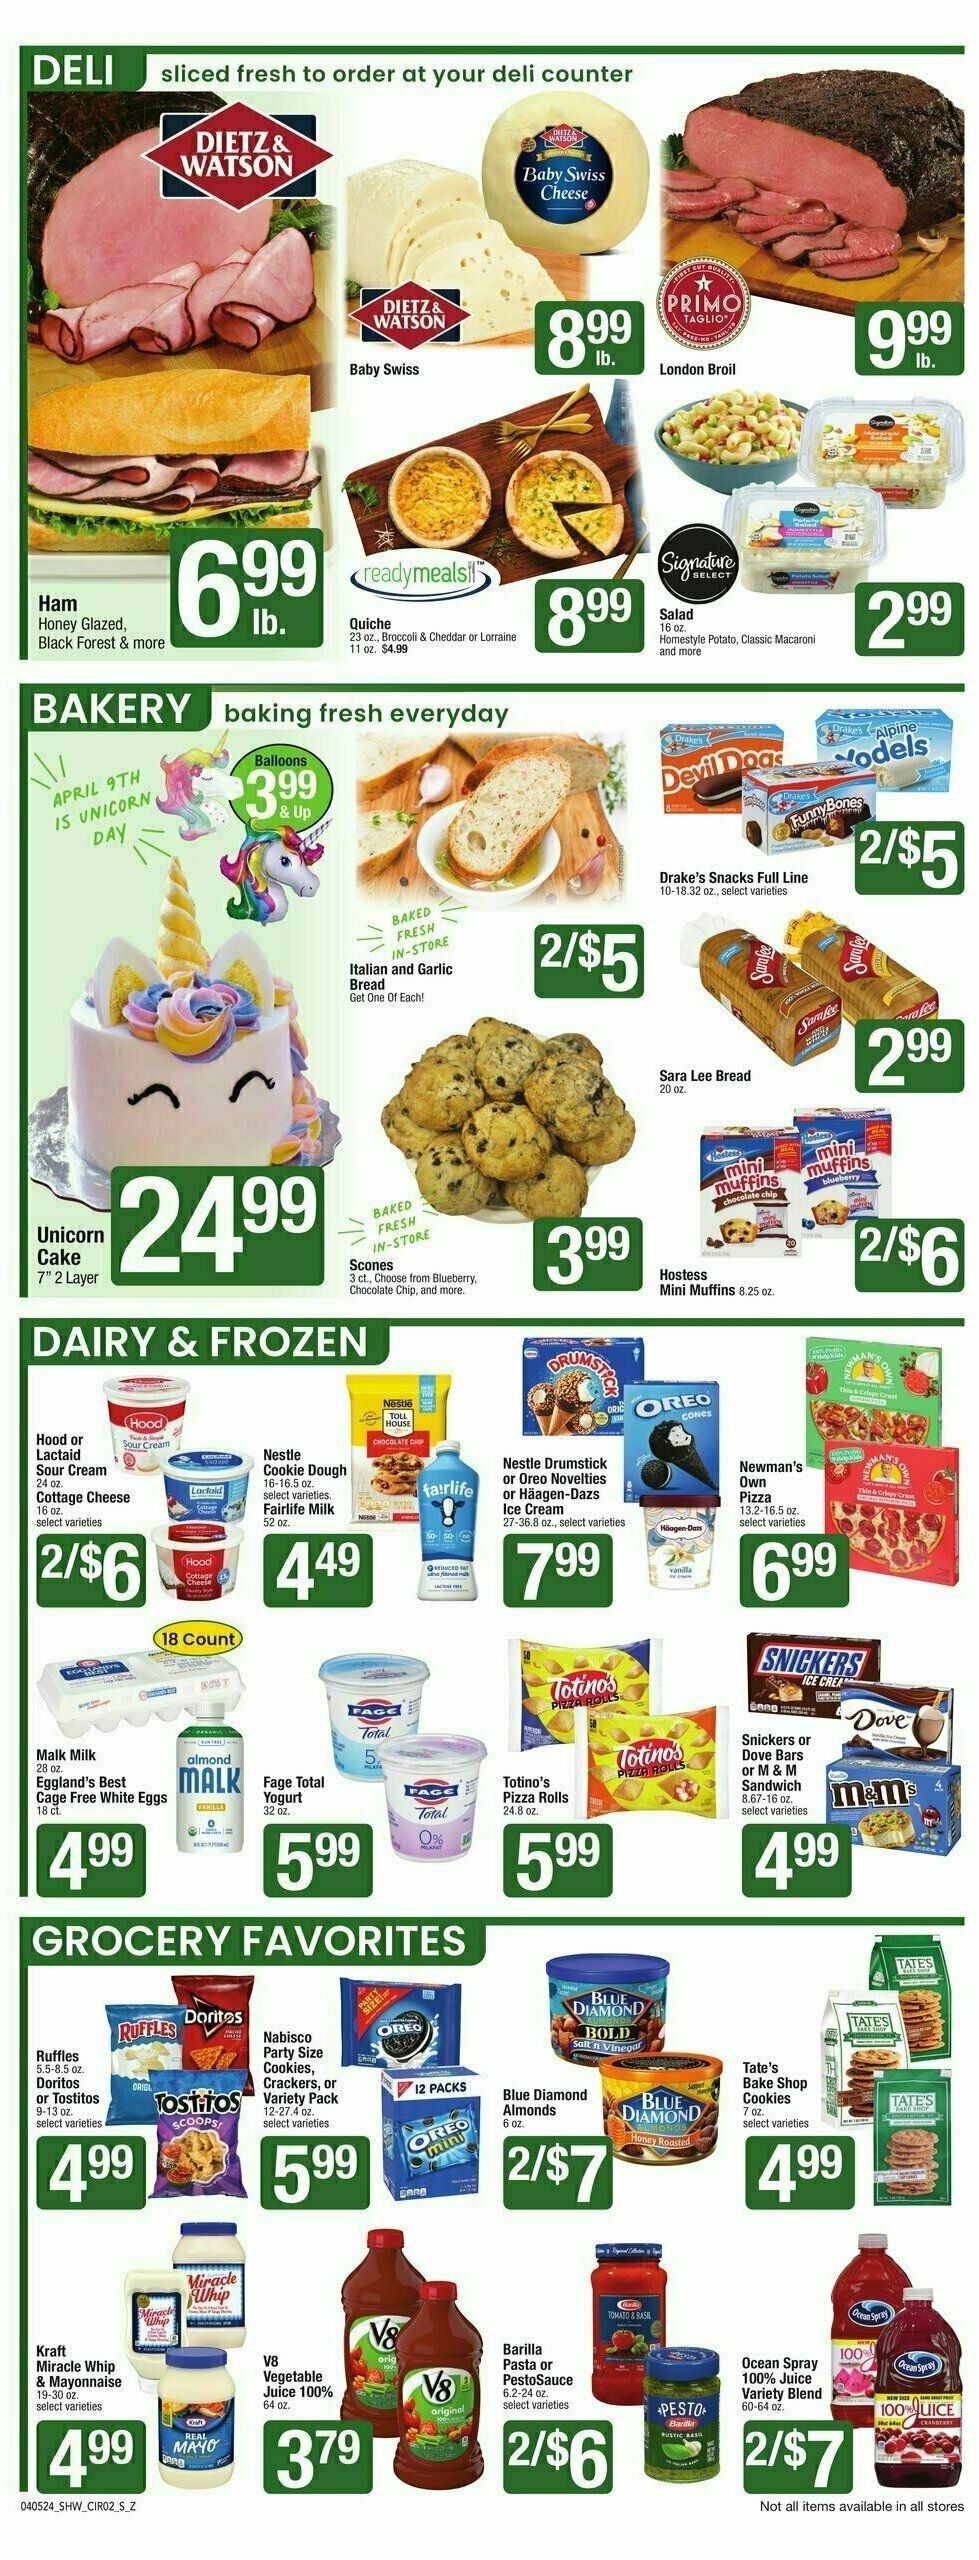 Shaw's Weekly Ad from April 5